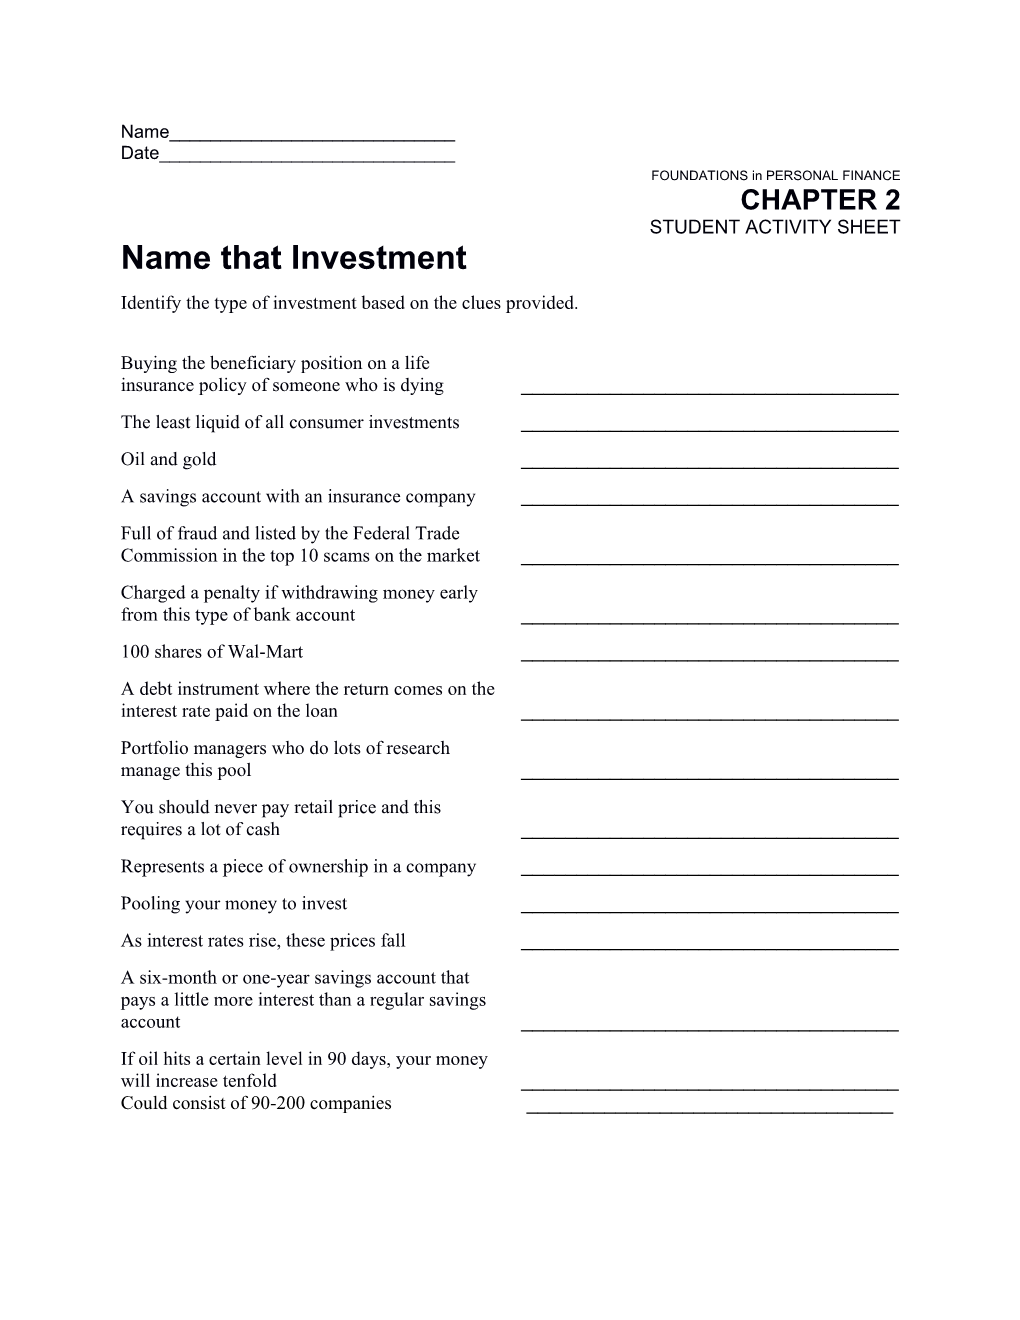 Identify the Type of Investment Based on the Clues Provided